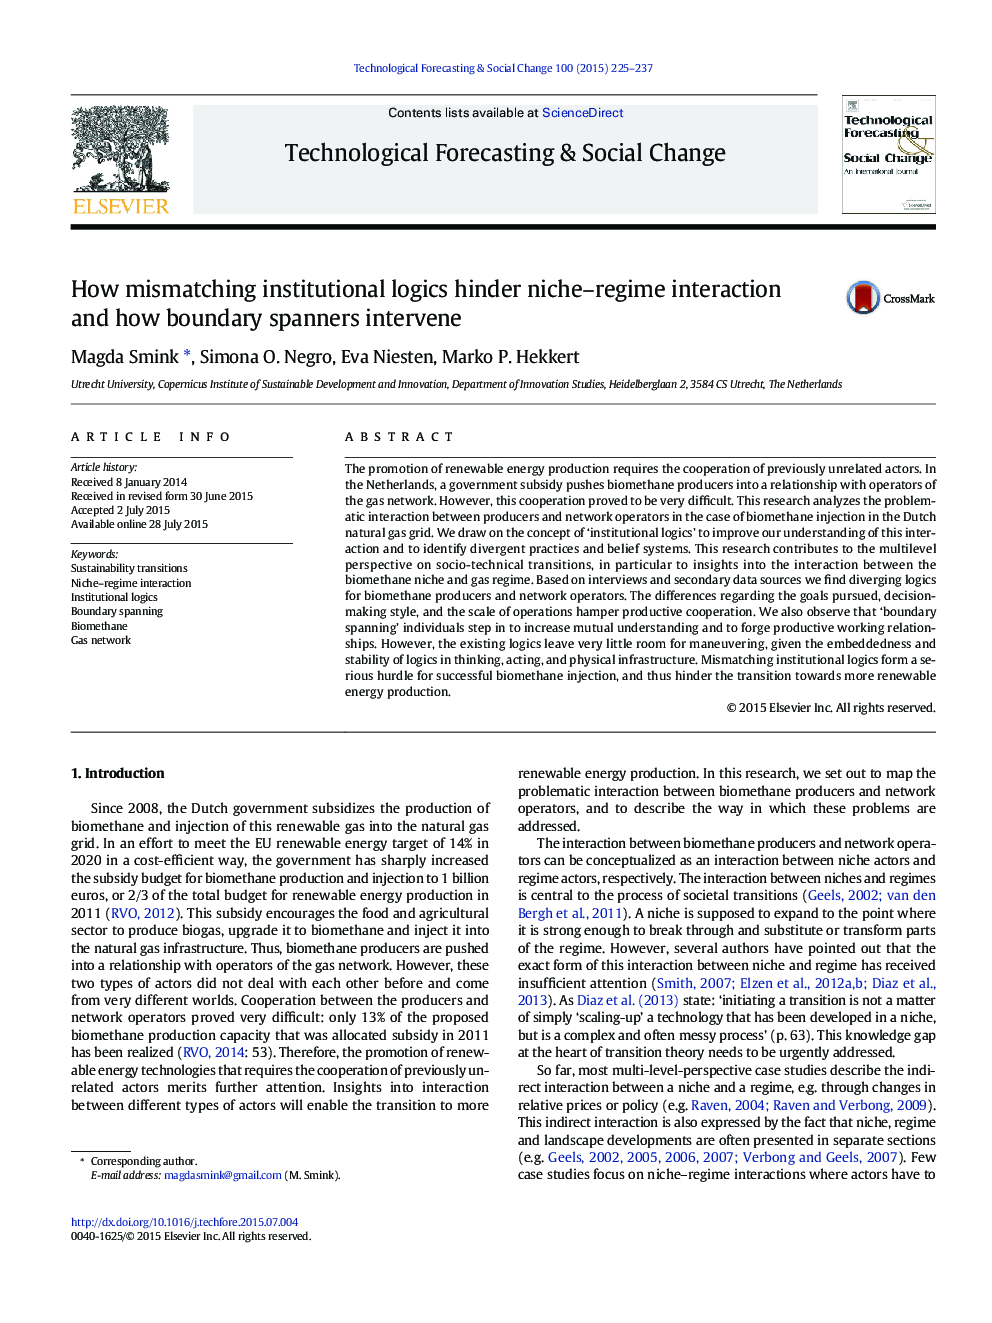 How mismatching institutional logics hinder niche–regime interaction and how boundary spanners intervene